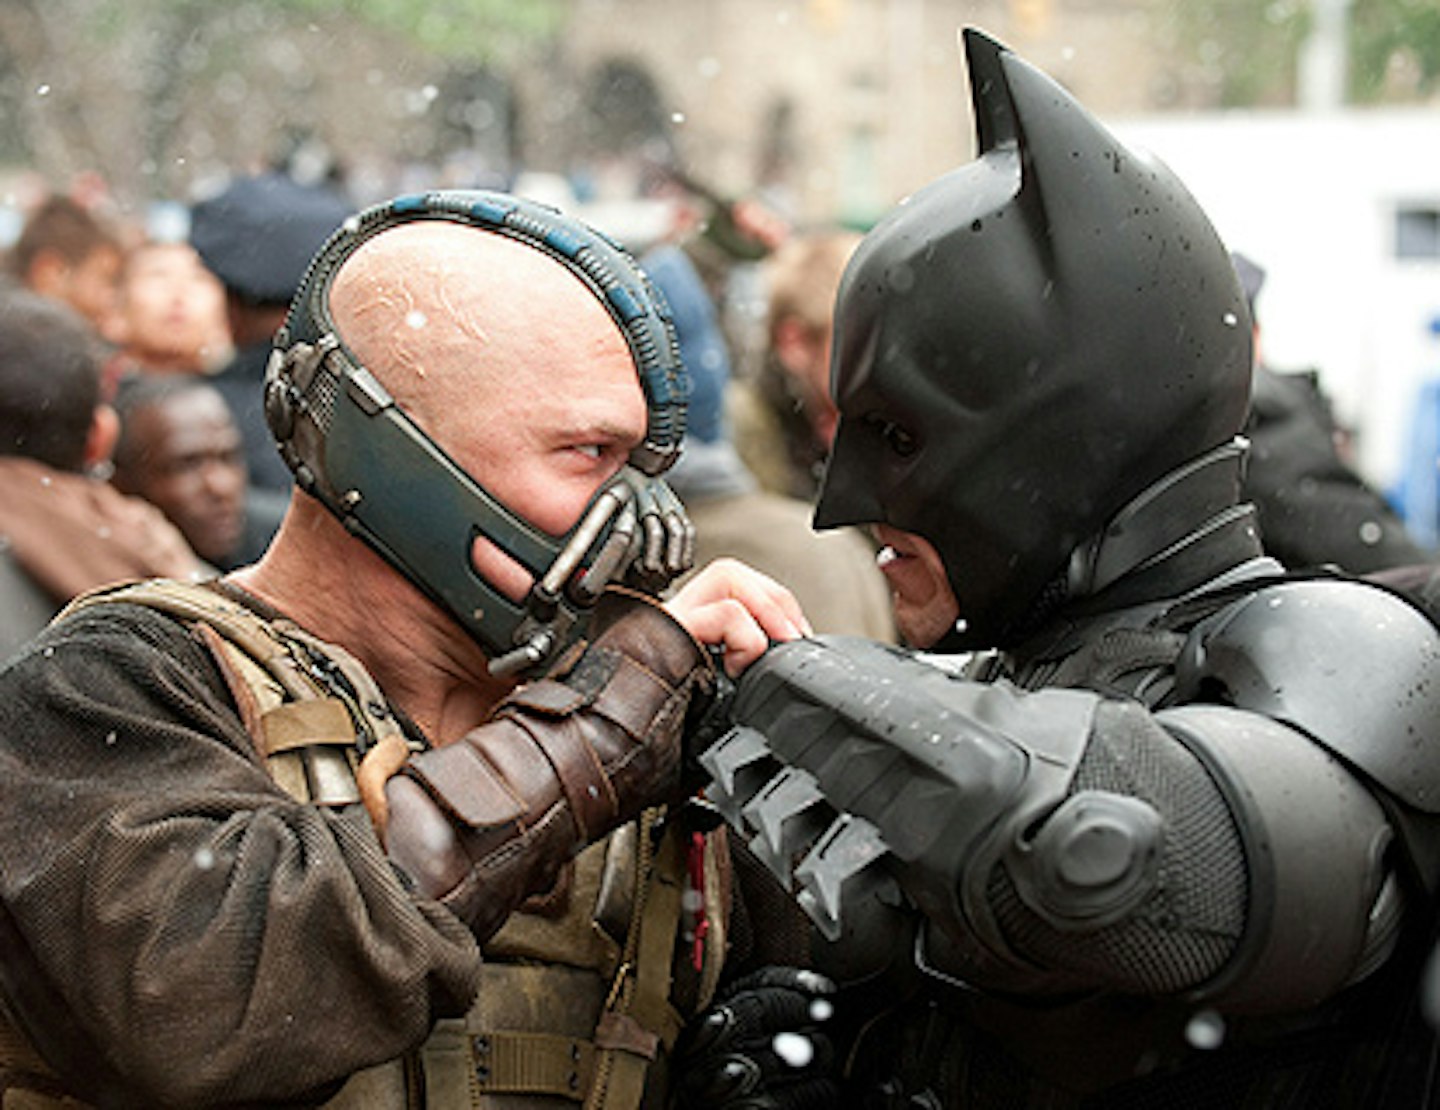 Bane and Batman fighting in The Dark Knight Rises